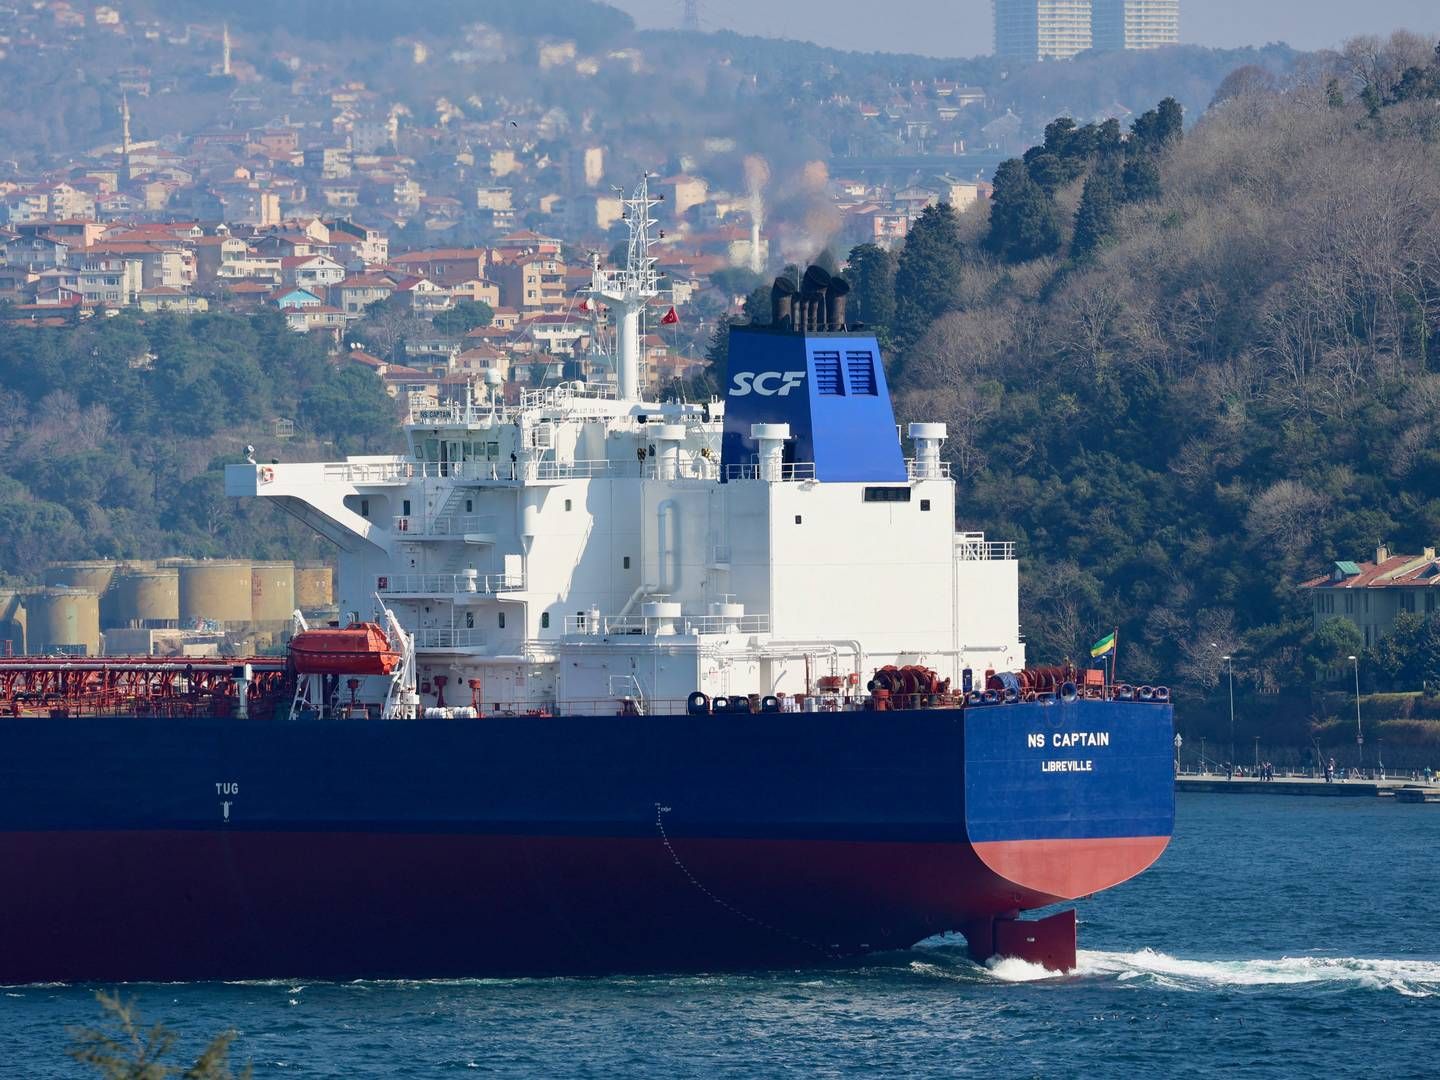 The Gabon-flagged crude tanker NS Captain, owned by Russia's leading tanker group Sovcomflot, sails through the Bosphorus. | Foto: Yoruk Isik/Reuters/Ritzau Scanpix